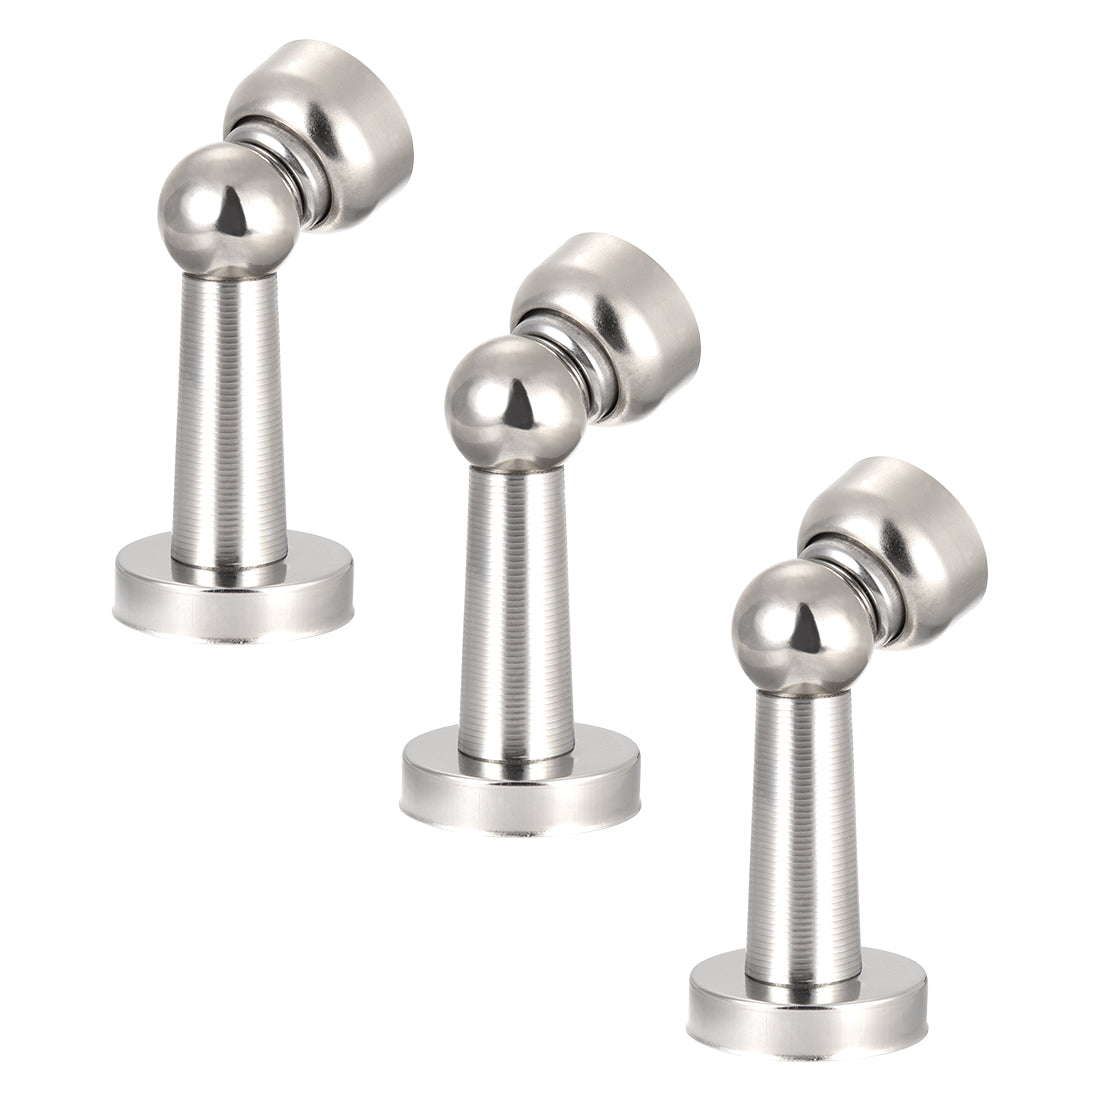 uxcell Uxcell Stainless Steel Door Magnetic Catch Holder Stopper Doorstop Polished Finish Silver Tone 3pcs